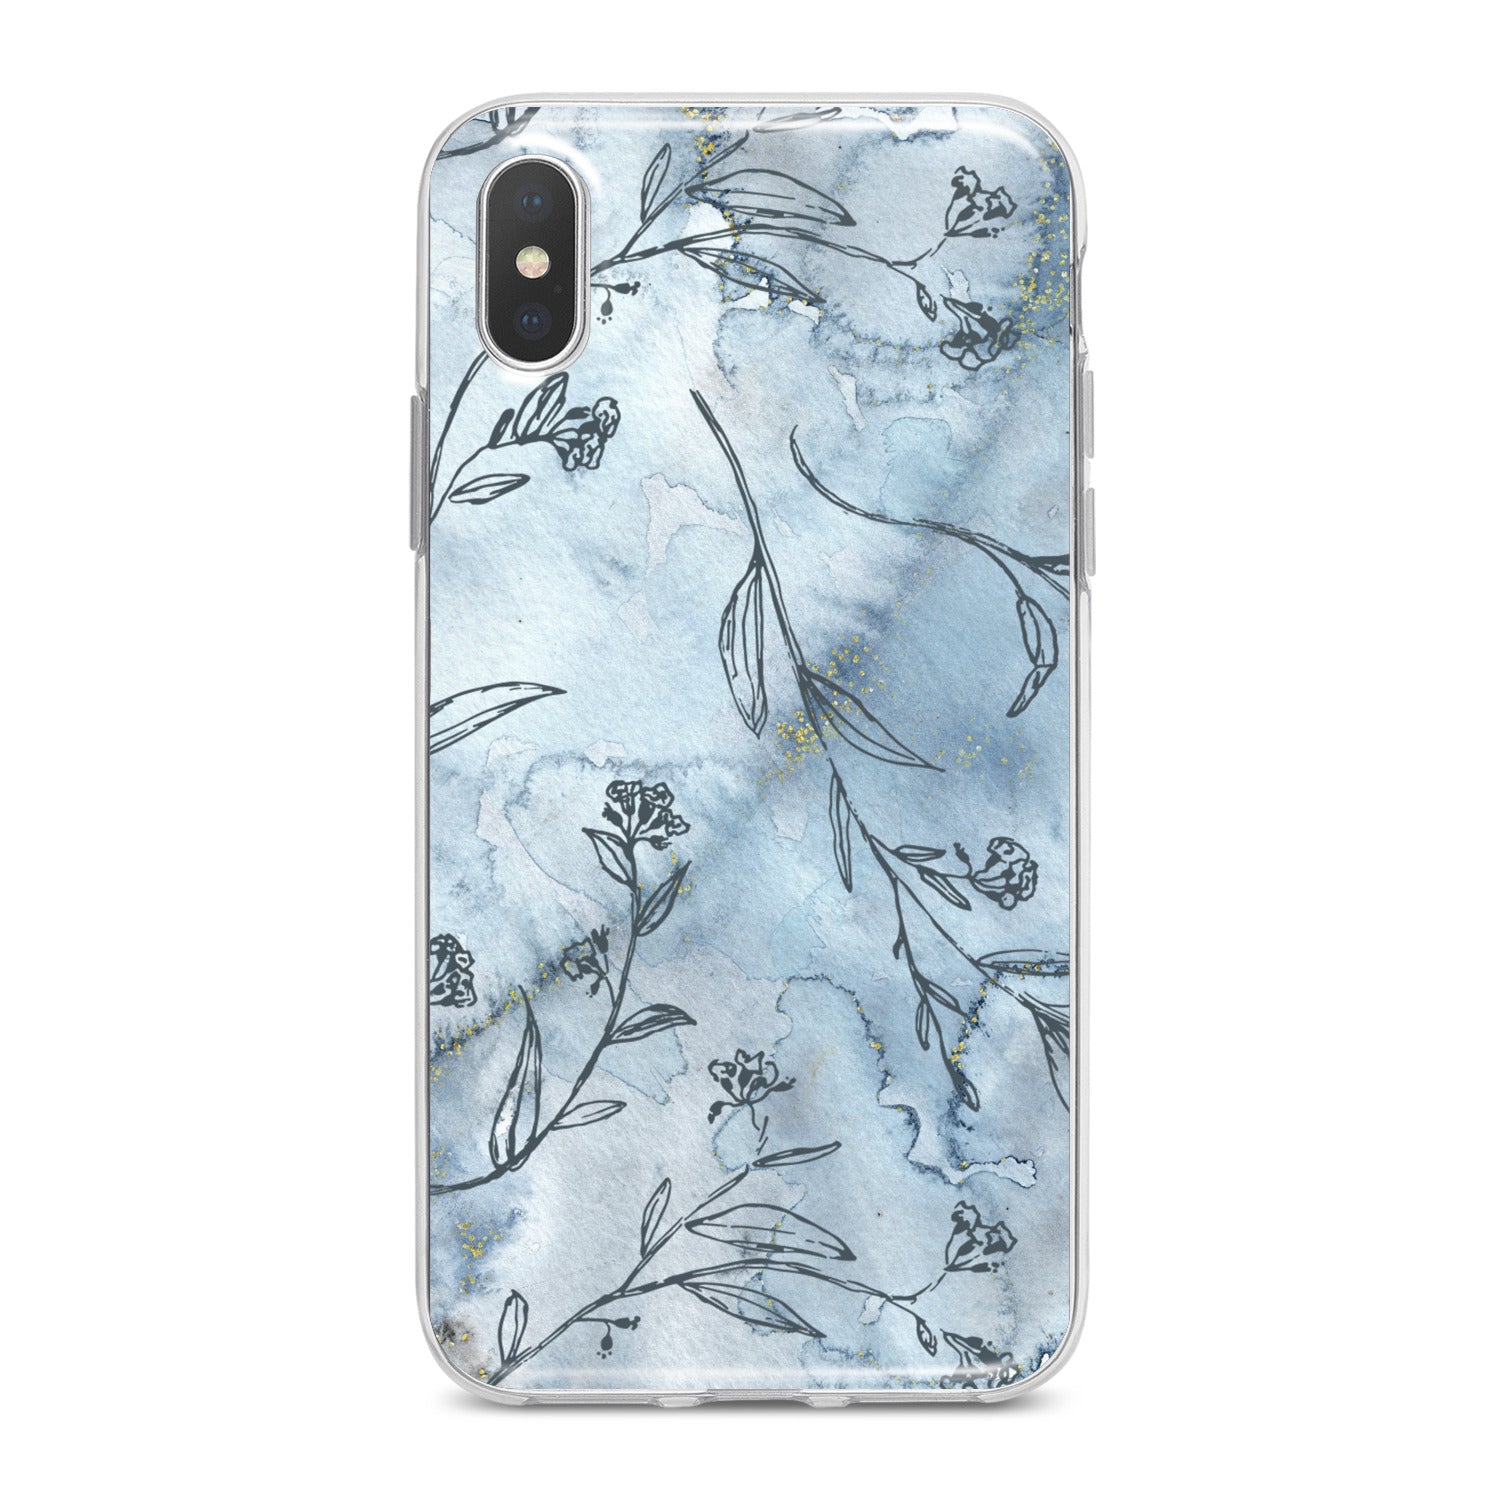 Lex Altern Painted Wildflowers Phone Case for your iPhone & Android phone.